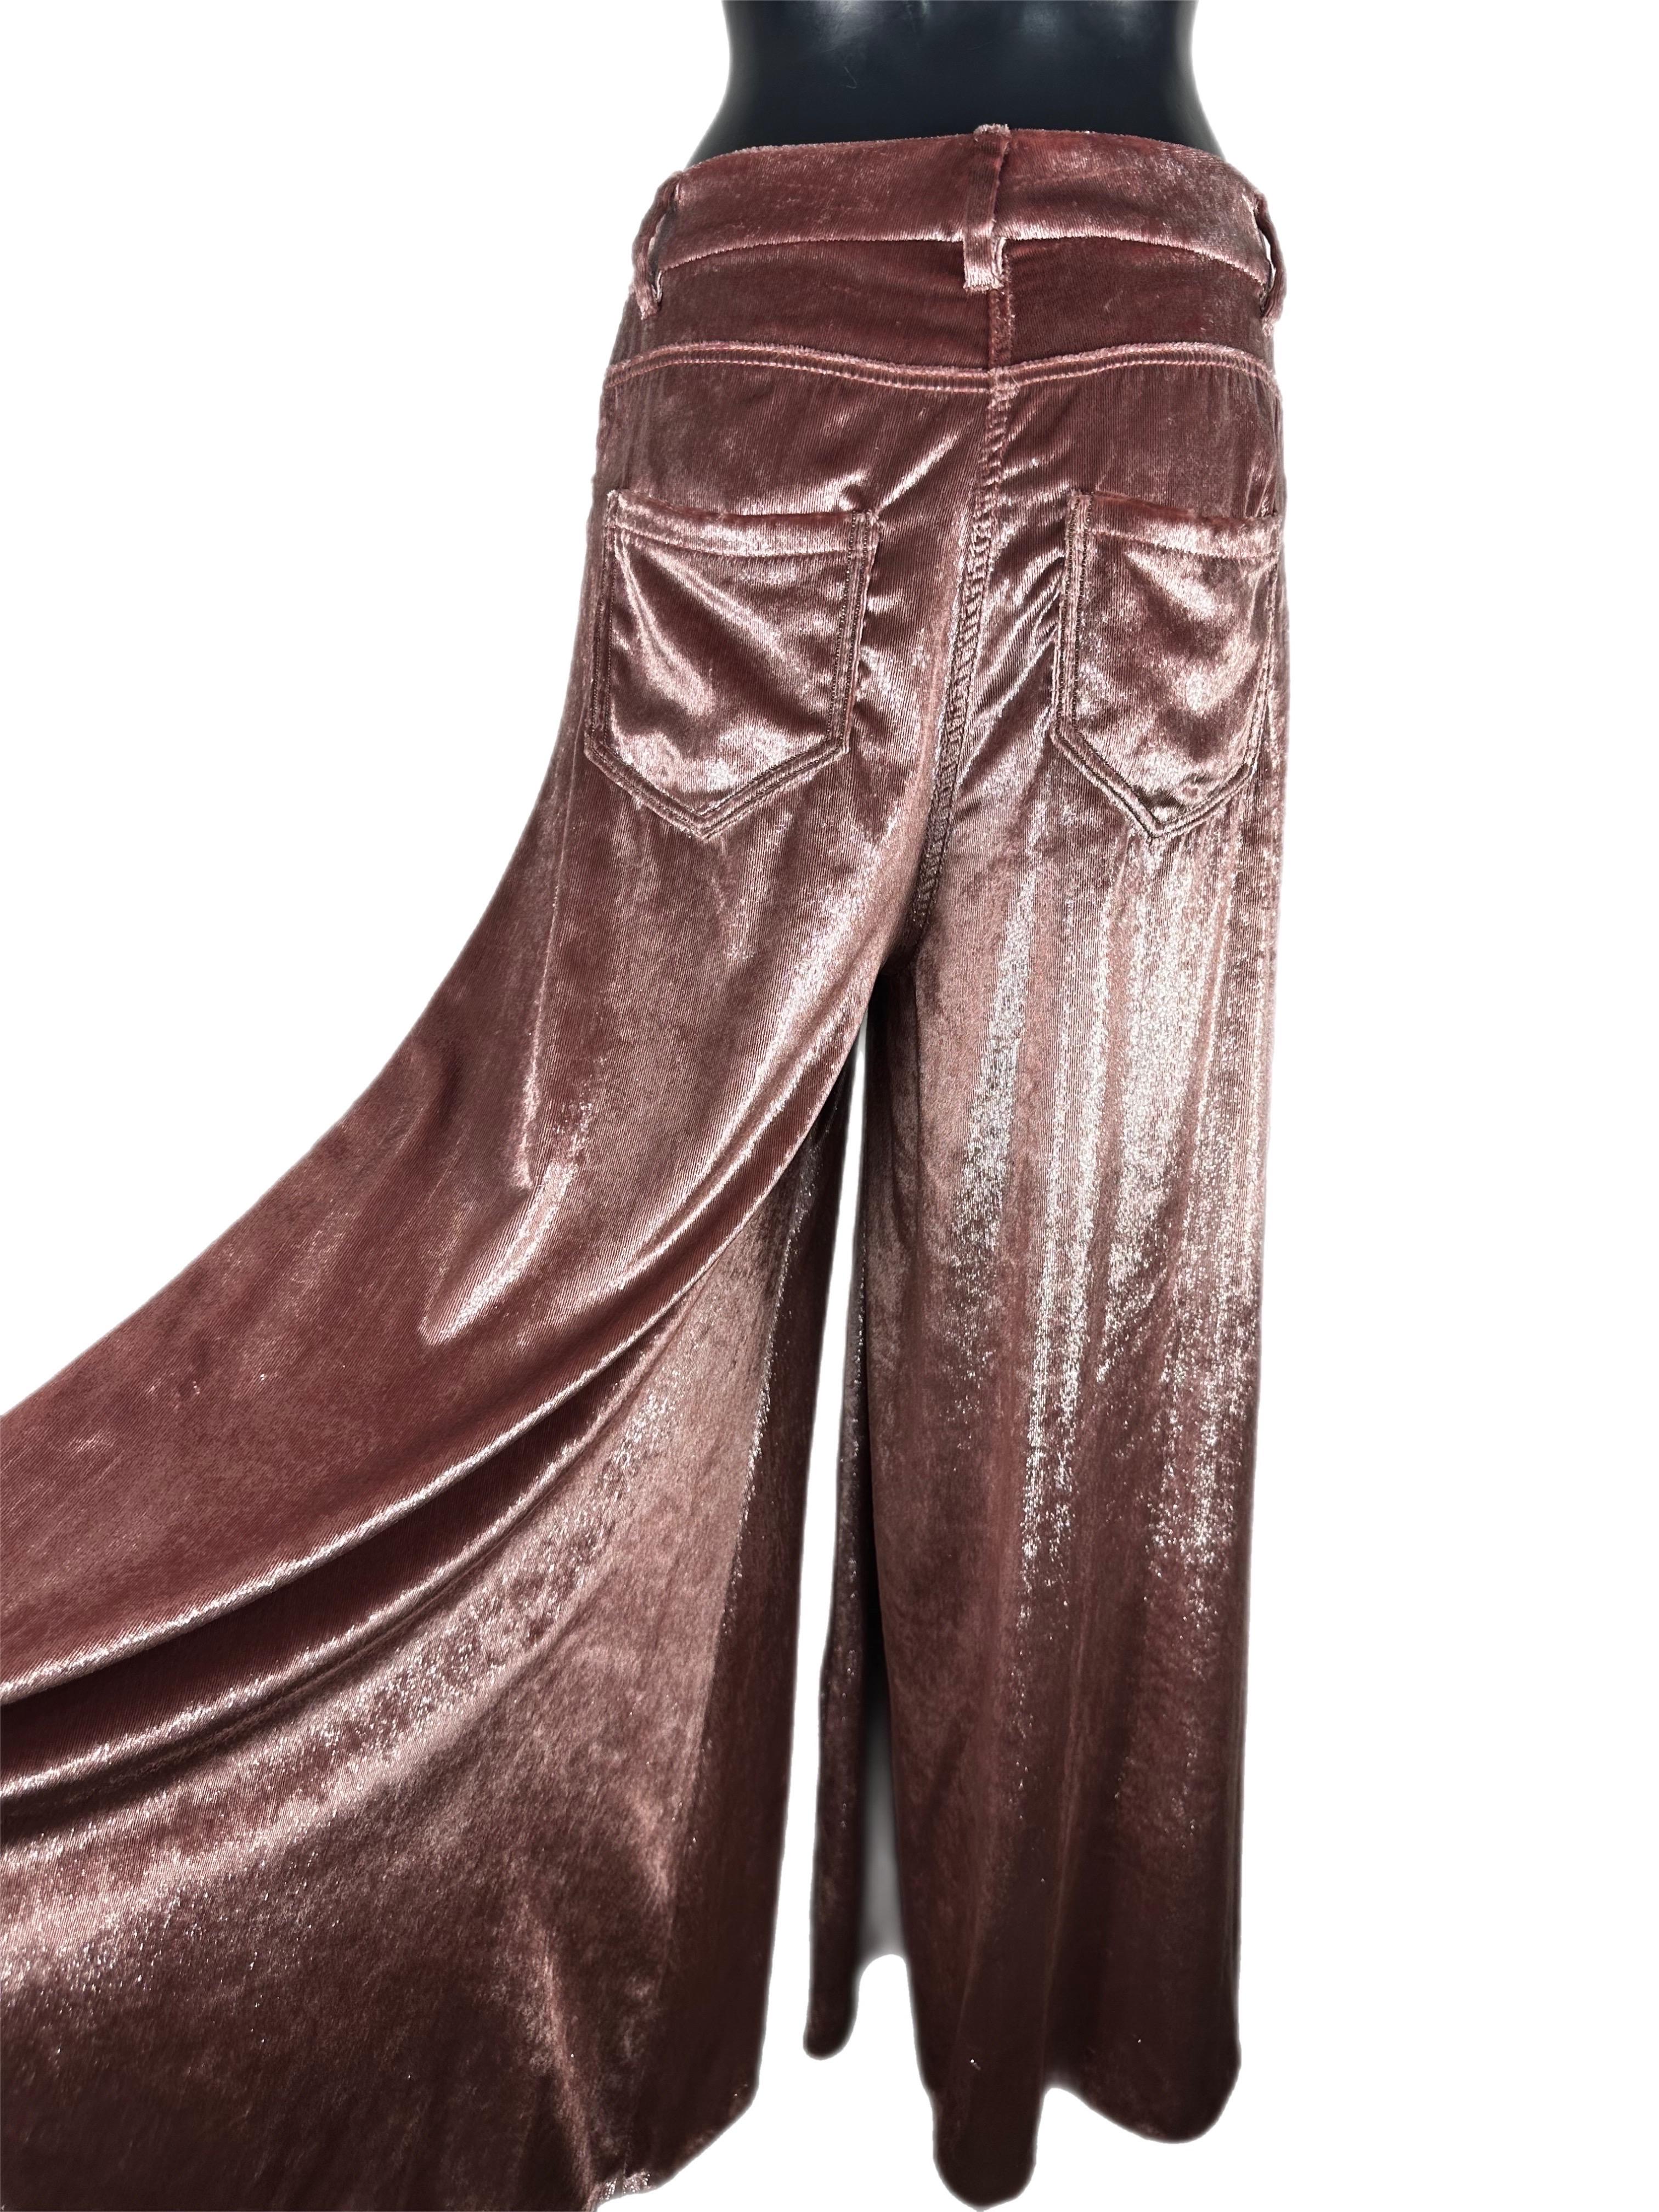 Pink Brunello Cucinelli palazzo trousers with Metallic fiber. New with tag
Measures:
Waist 40cm
Hips 54cm
Leg width on the thigh 48cm